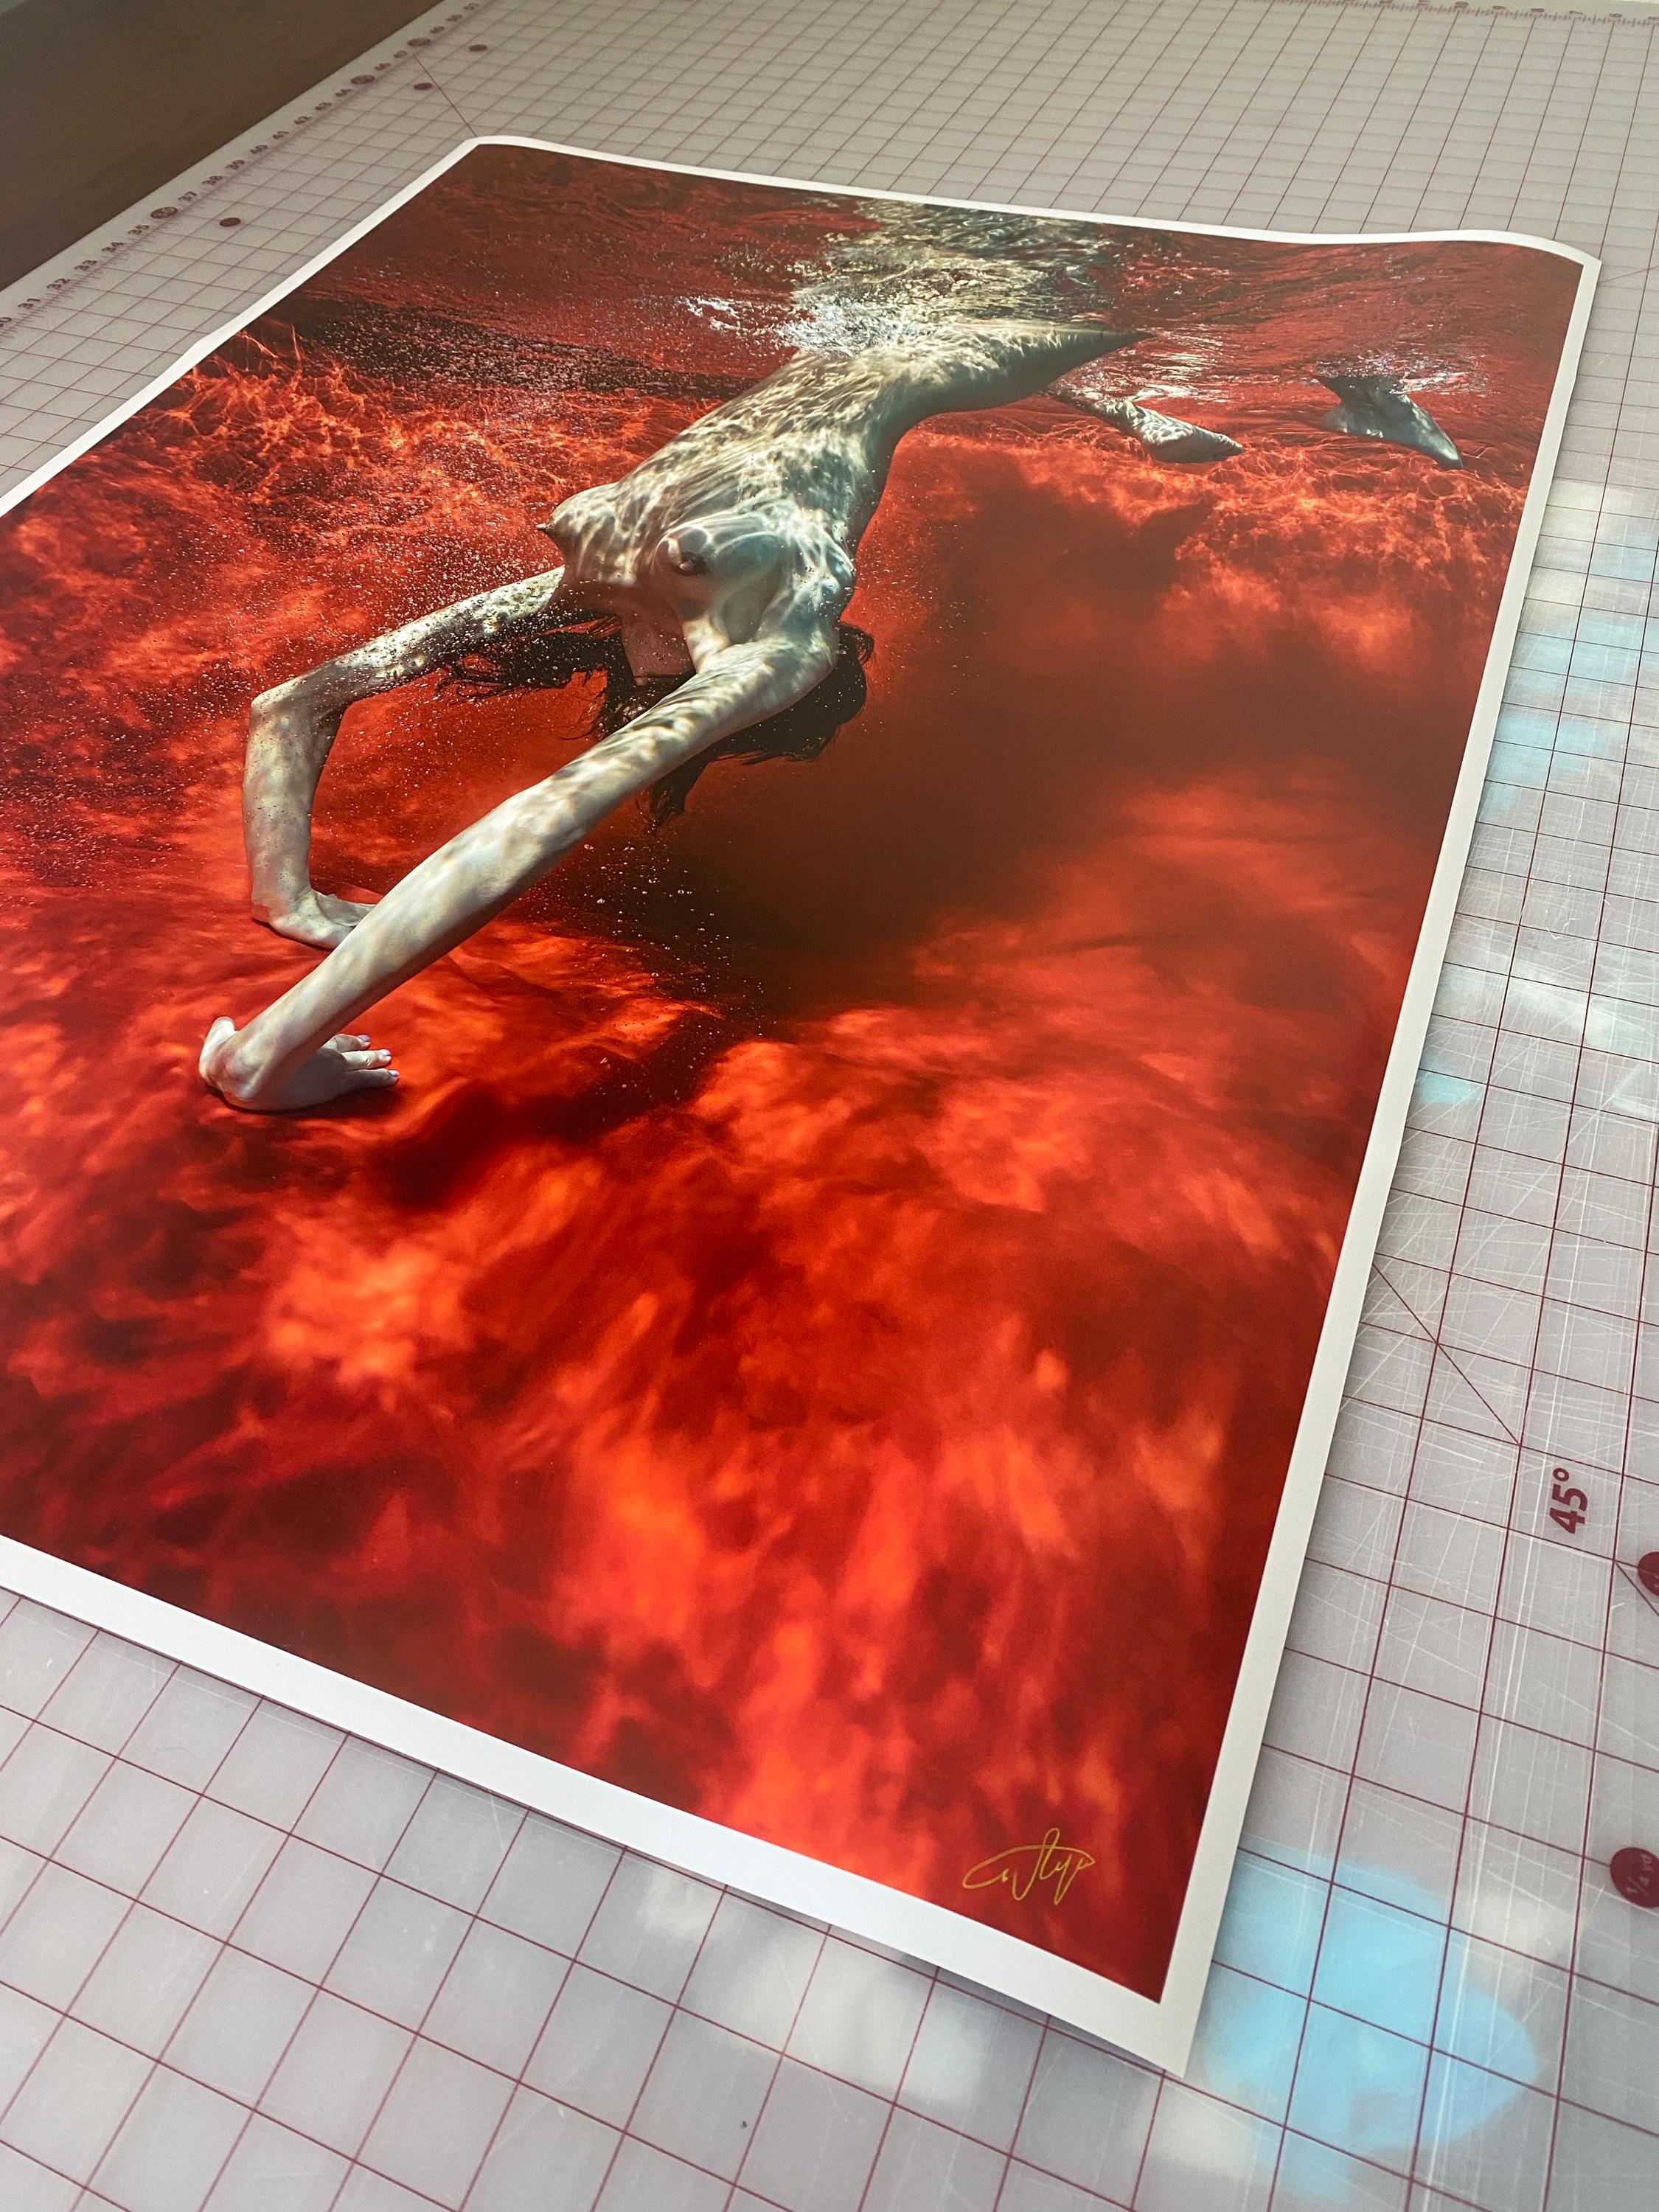 Blood and Milk VIII - underwater nude photograph - archival pigment 35x26